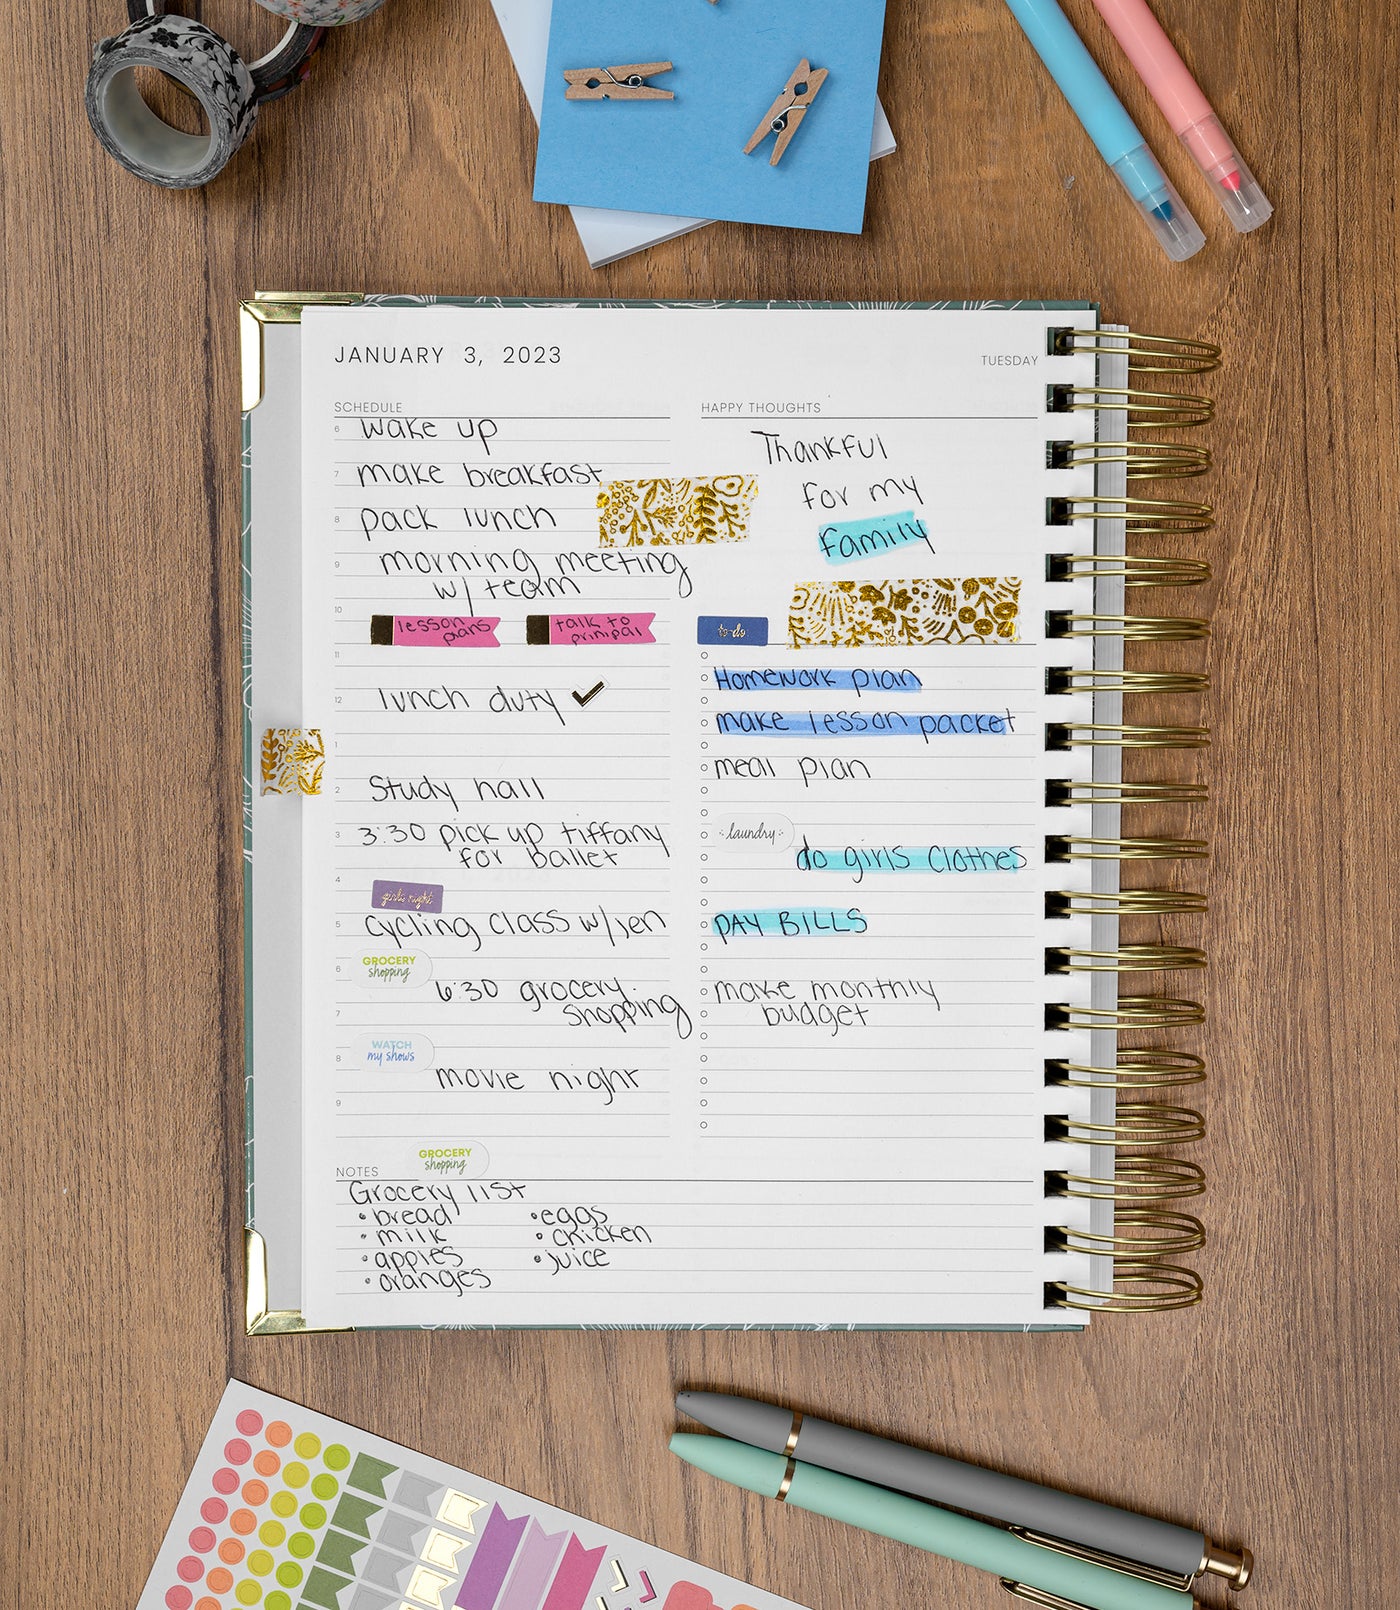 Daily Planner - Emma